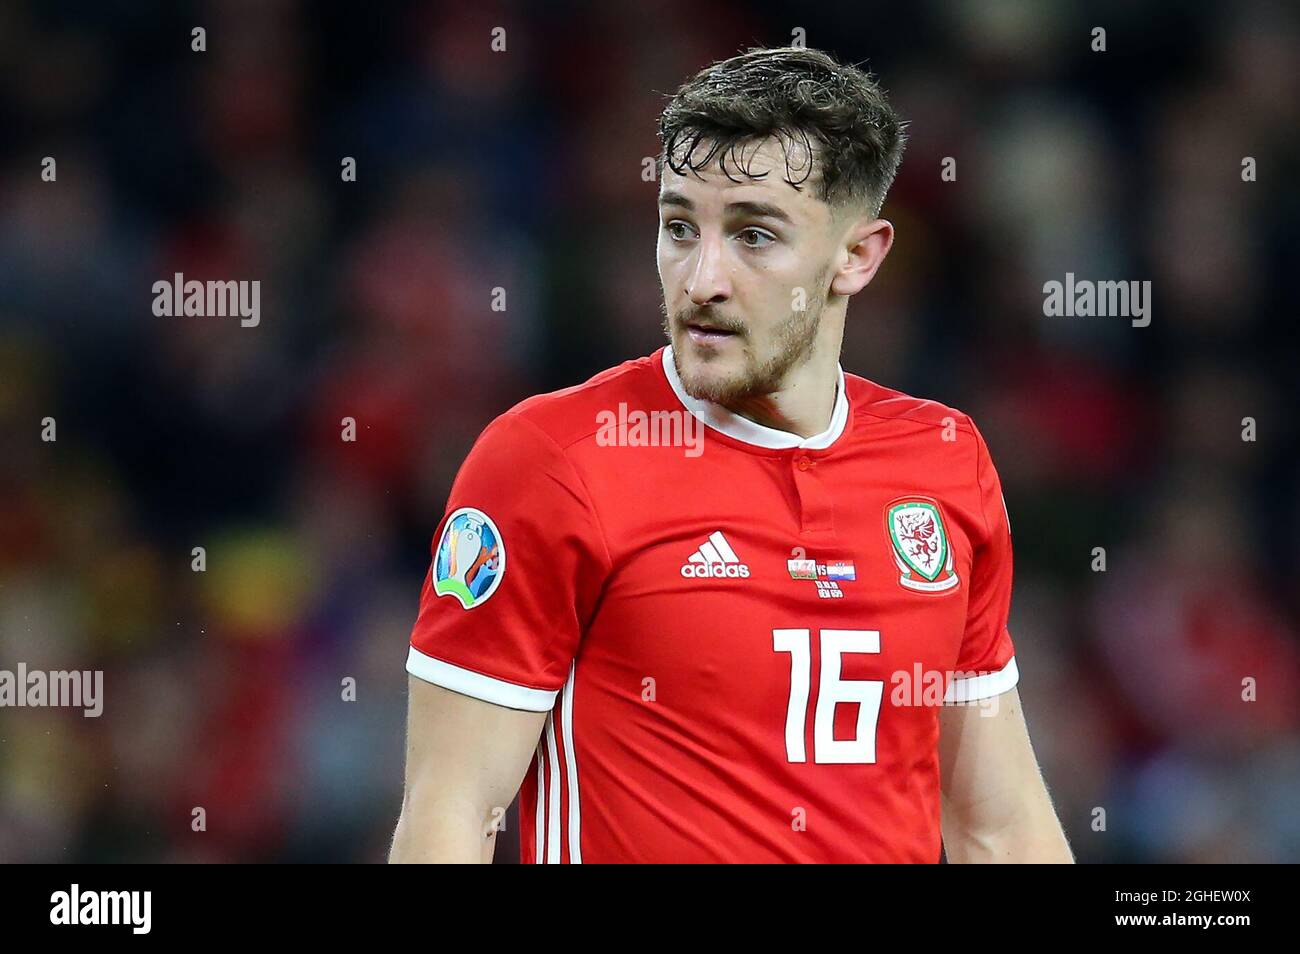 Tom Lockyer of Wales during the UEFA Euro 2020 Qualifying match at the Cardiff City Stadium, Cardiff. Picture date: 13th October 2019. Picture credit should read: James Wilson/Sportimage via PA Images Stock Photo